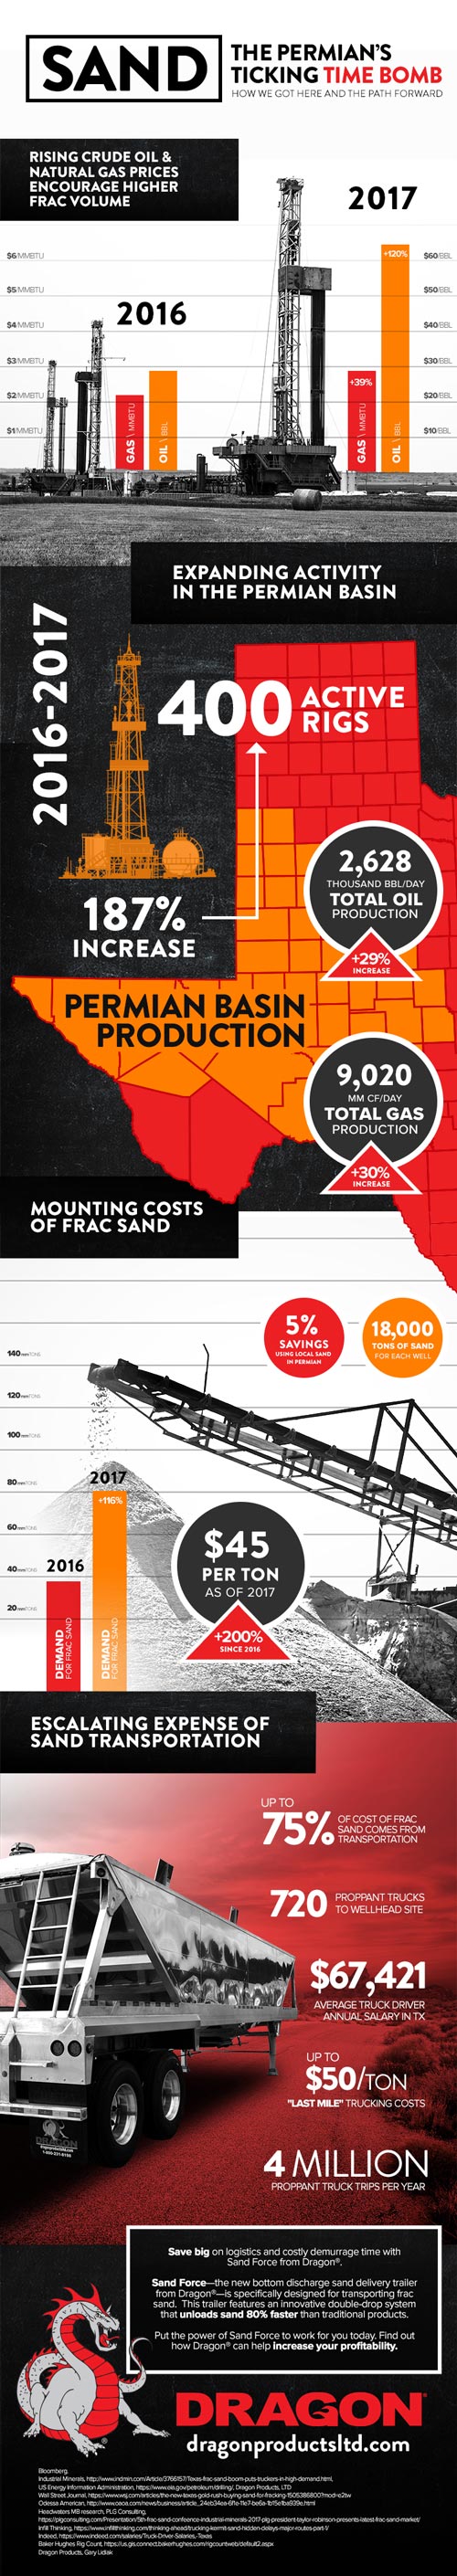 Frac Sand - The Permian Basin's Ticking Timebomb | Free Frac Sand Infographic